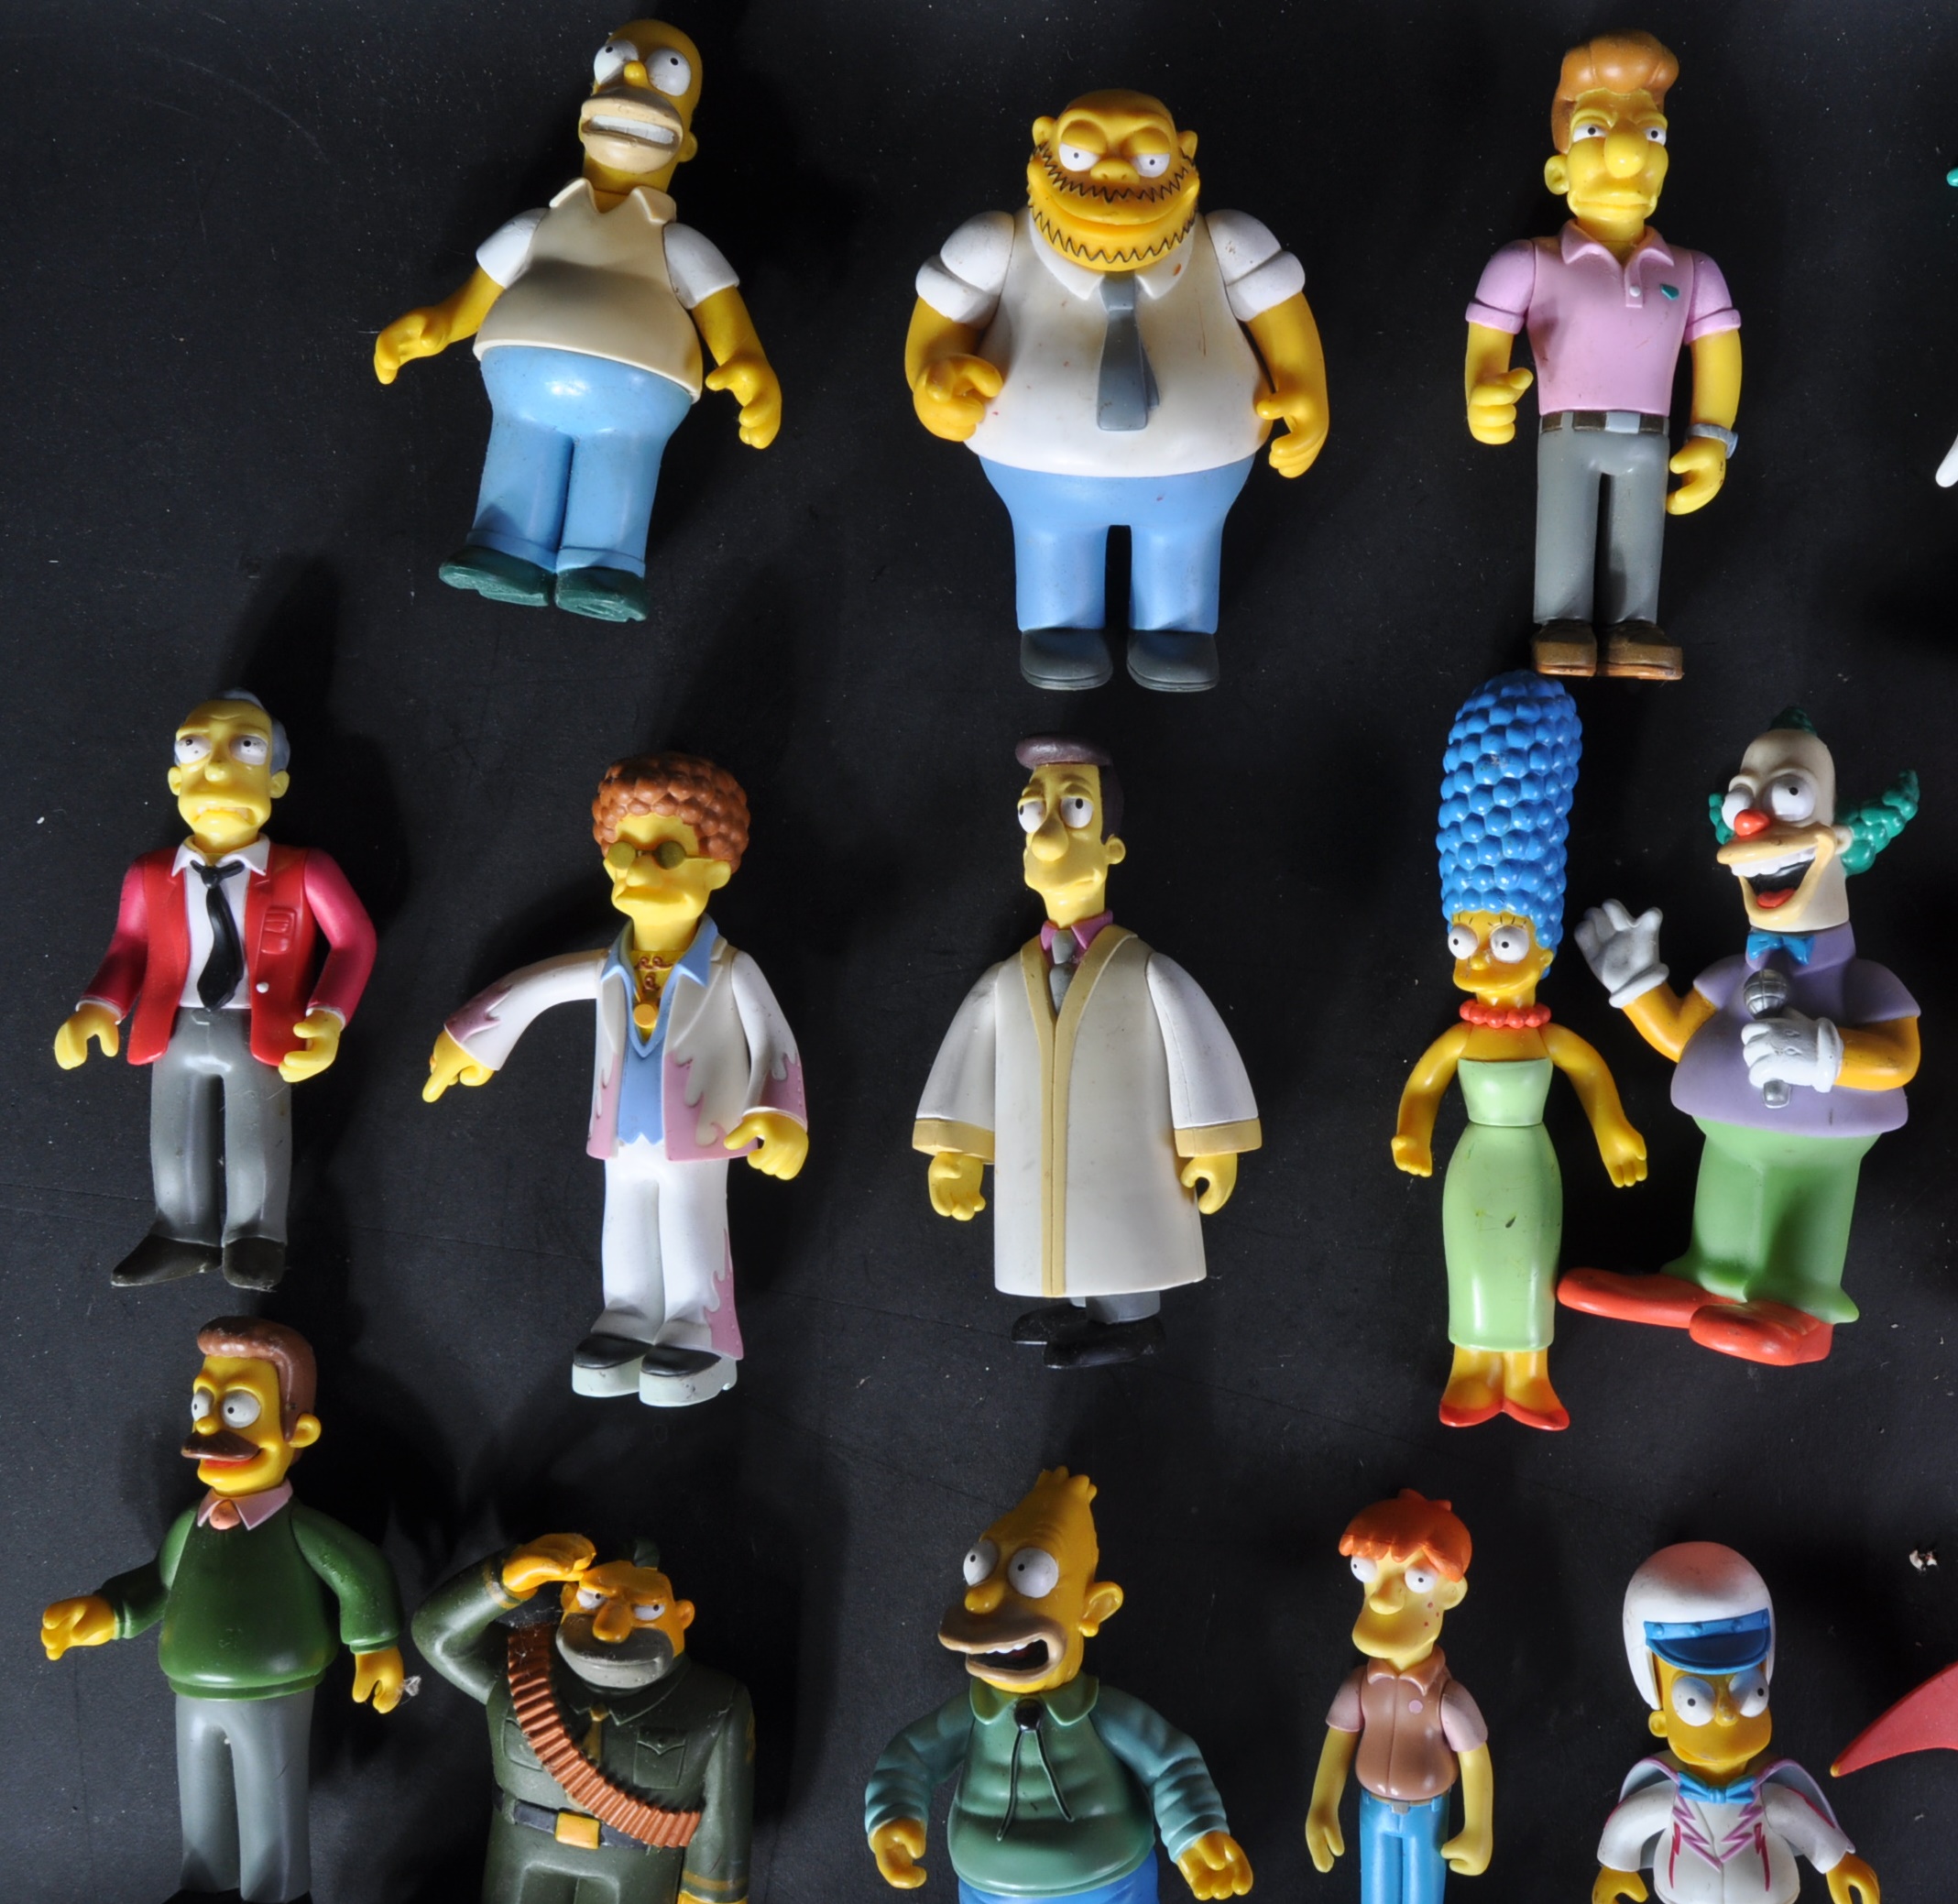 THE SIMPSONS - PLAYMATES ' WORLD OF SPRINGFIELD ' FIGURINES - Image 2 of 5